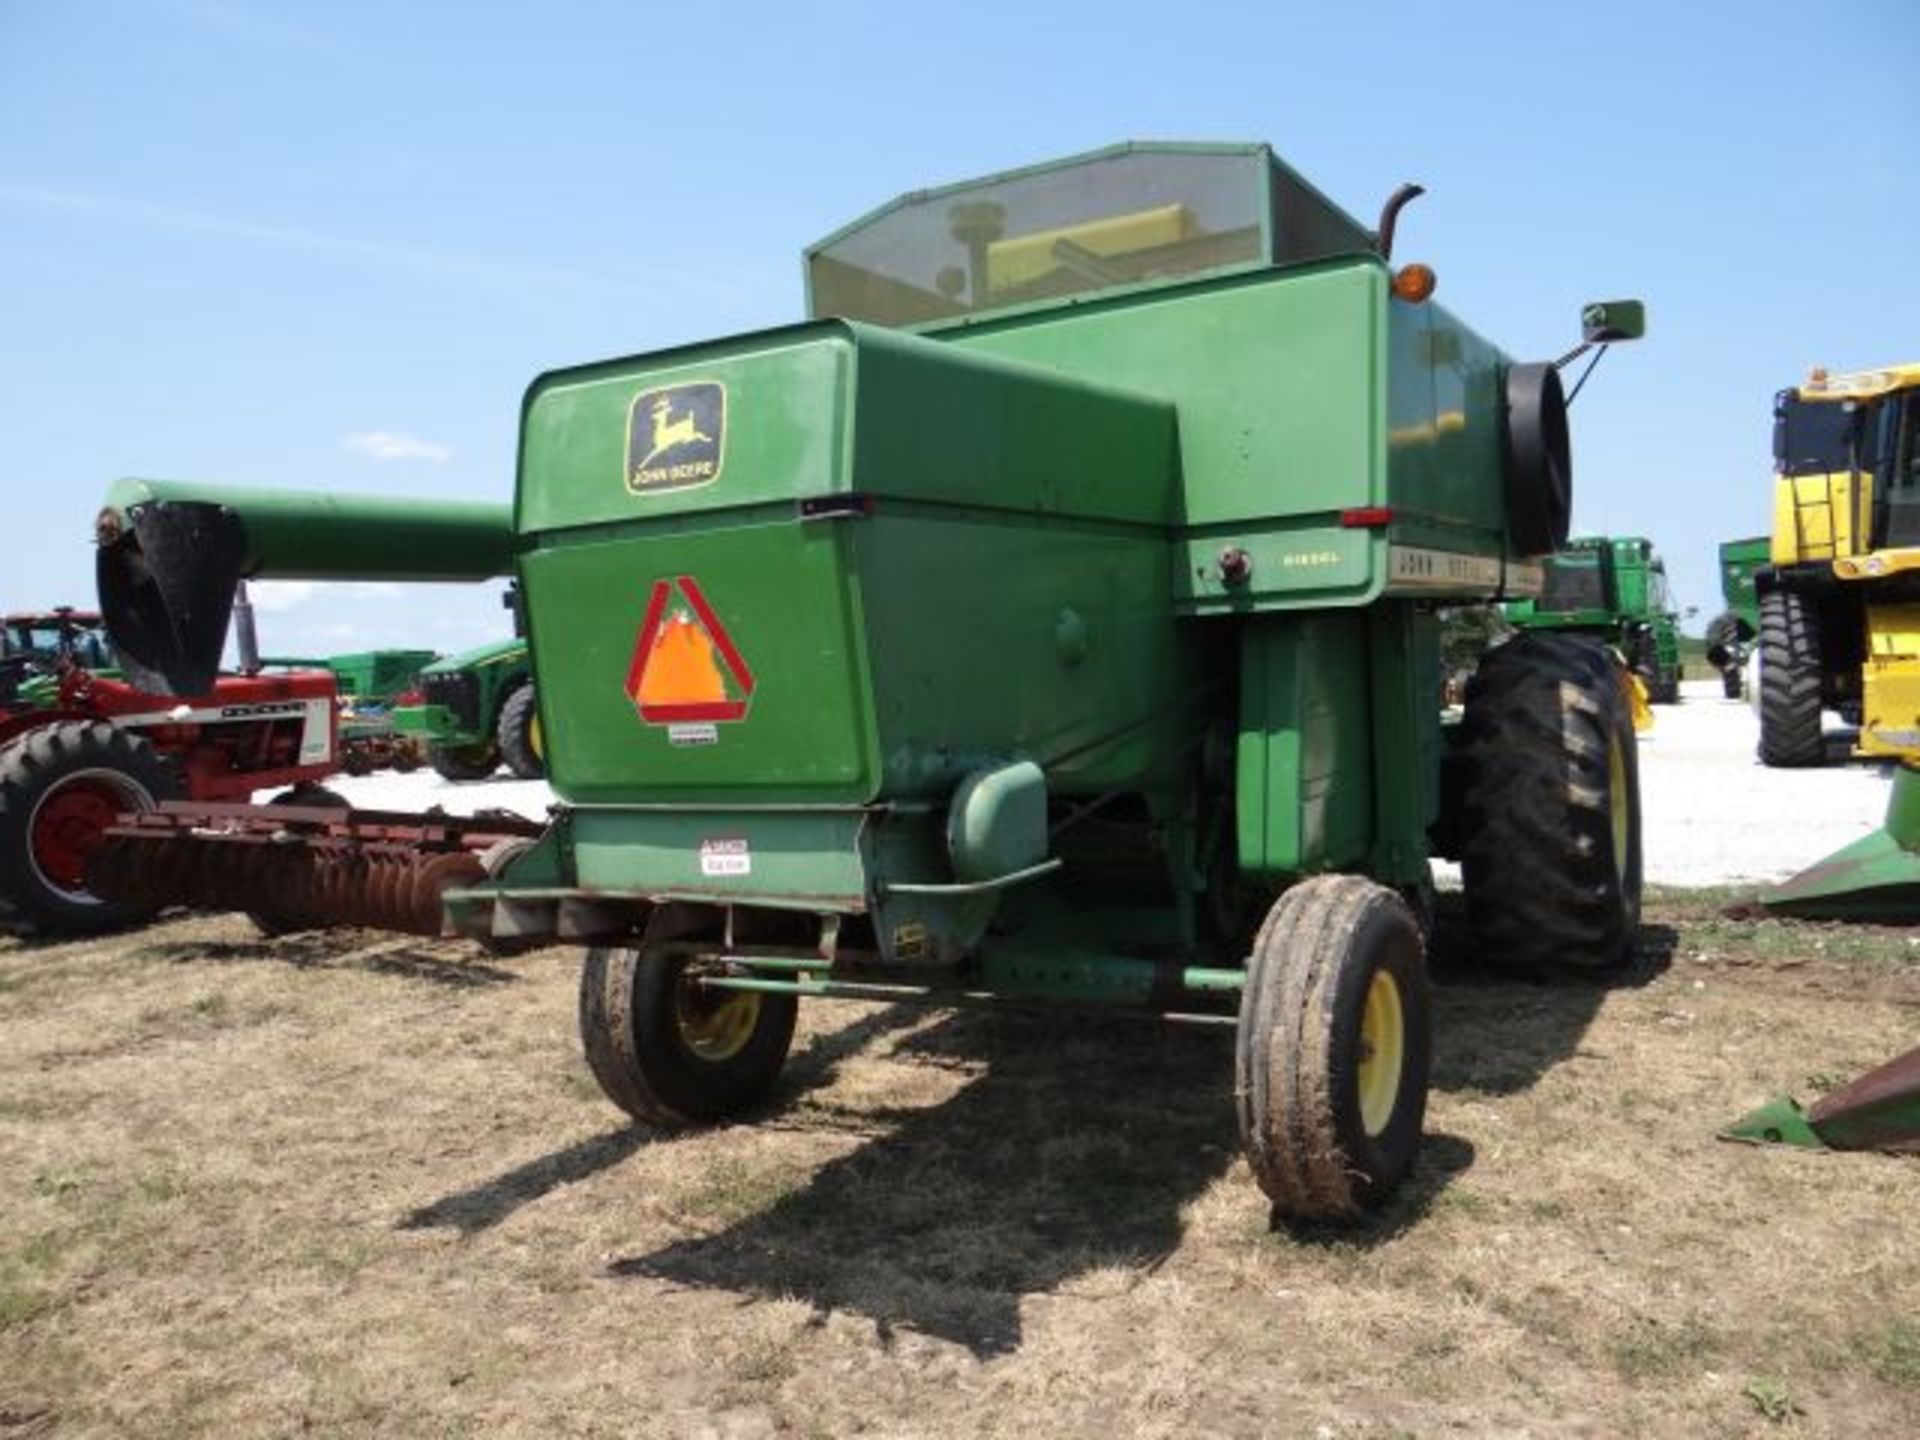 JD 4400 Combine, 1979 Less than 3000 hrs, Diesel, 2wd, Chopper, Lots of New Parts, Runs and Works - Image 3 of 3